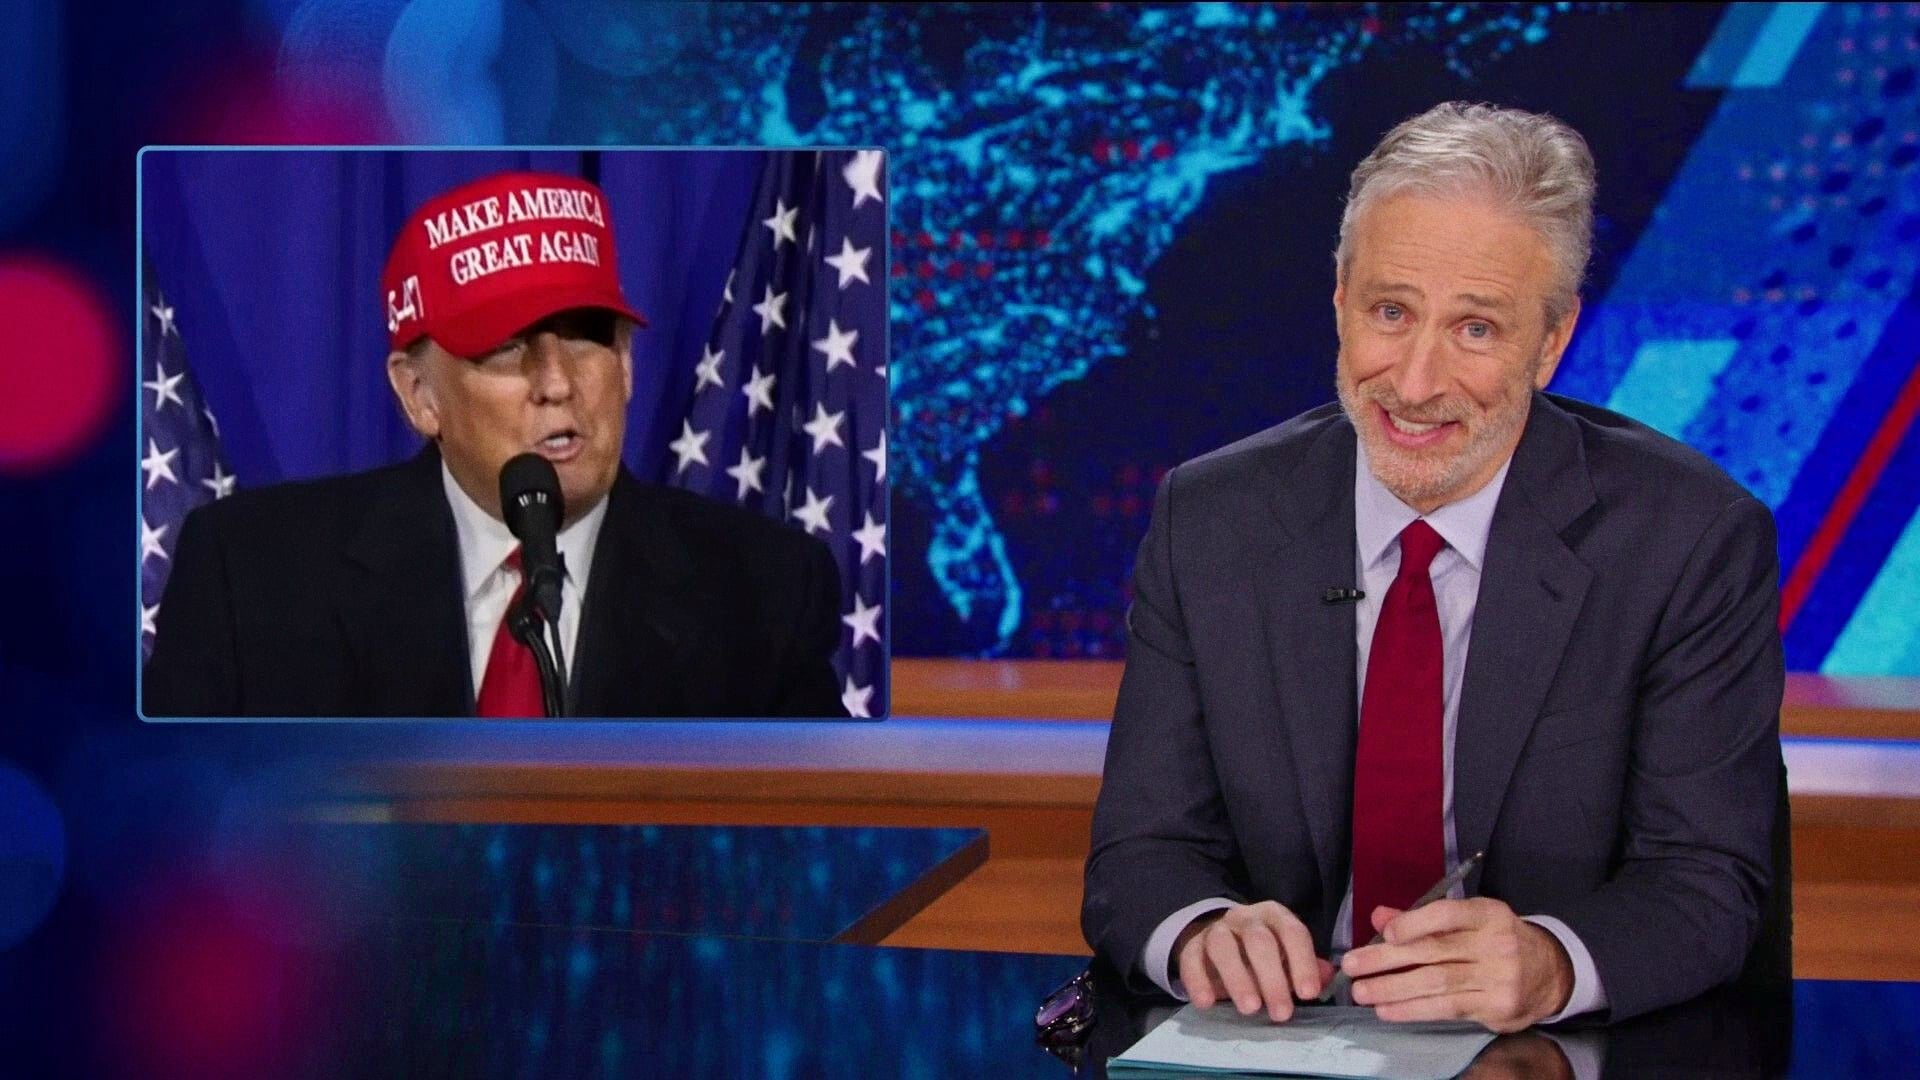 The Daily Show Staffel 29 :Folge 13 